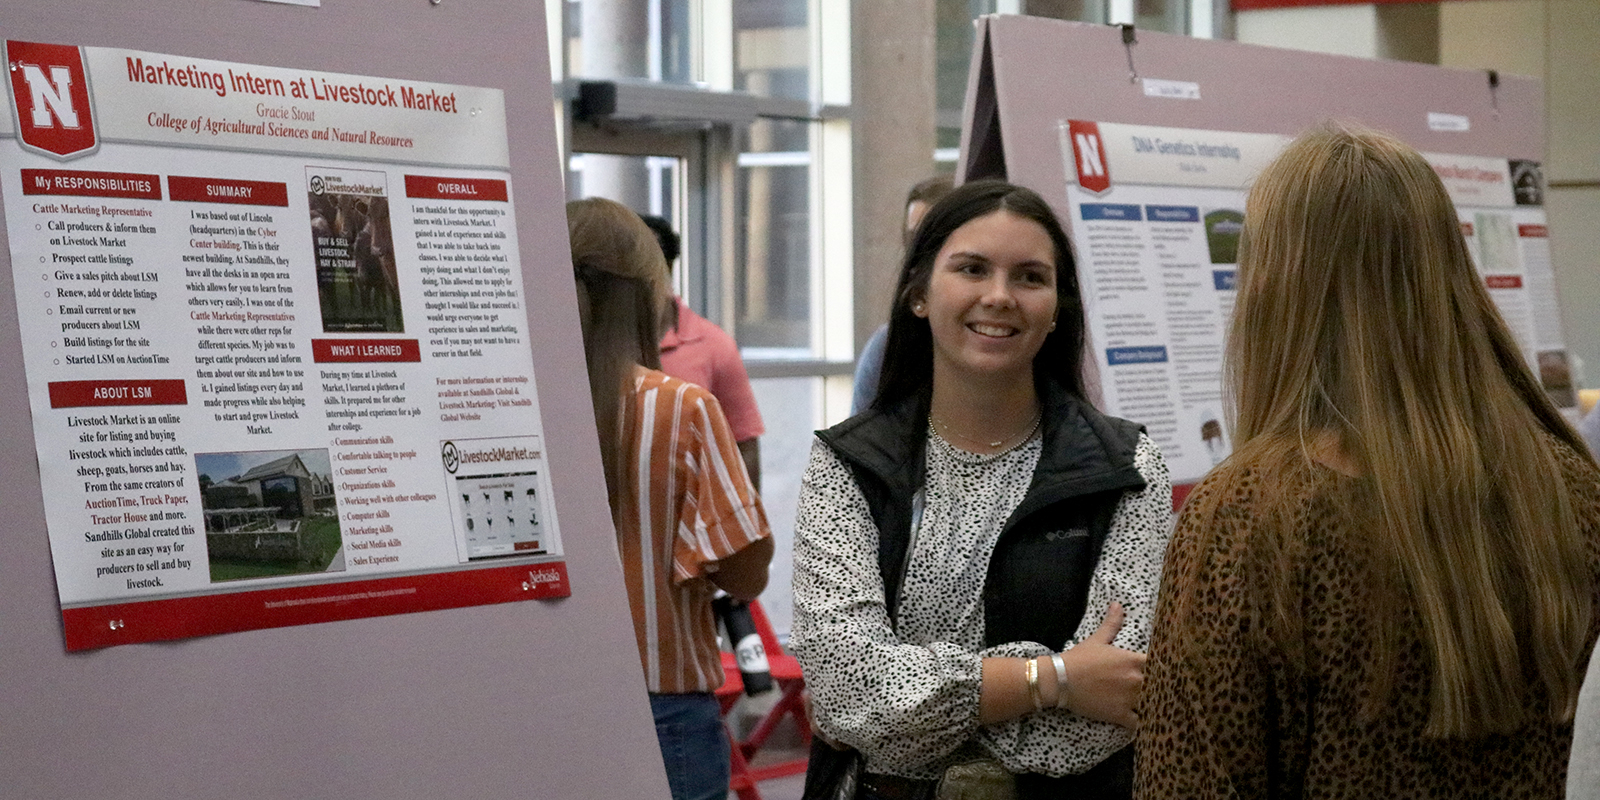 Two students discussing an internship experience poster